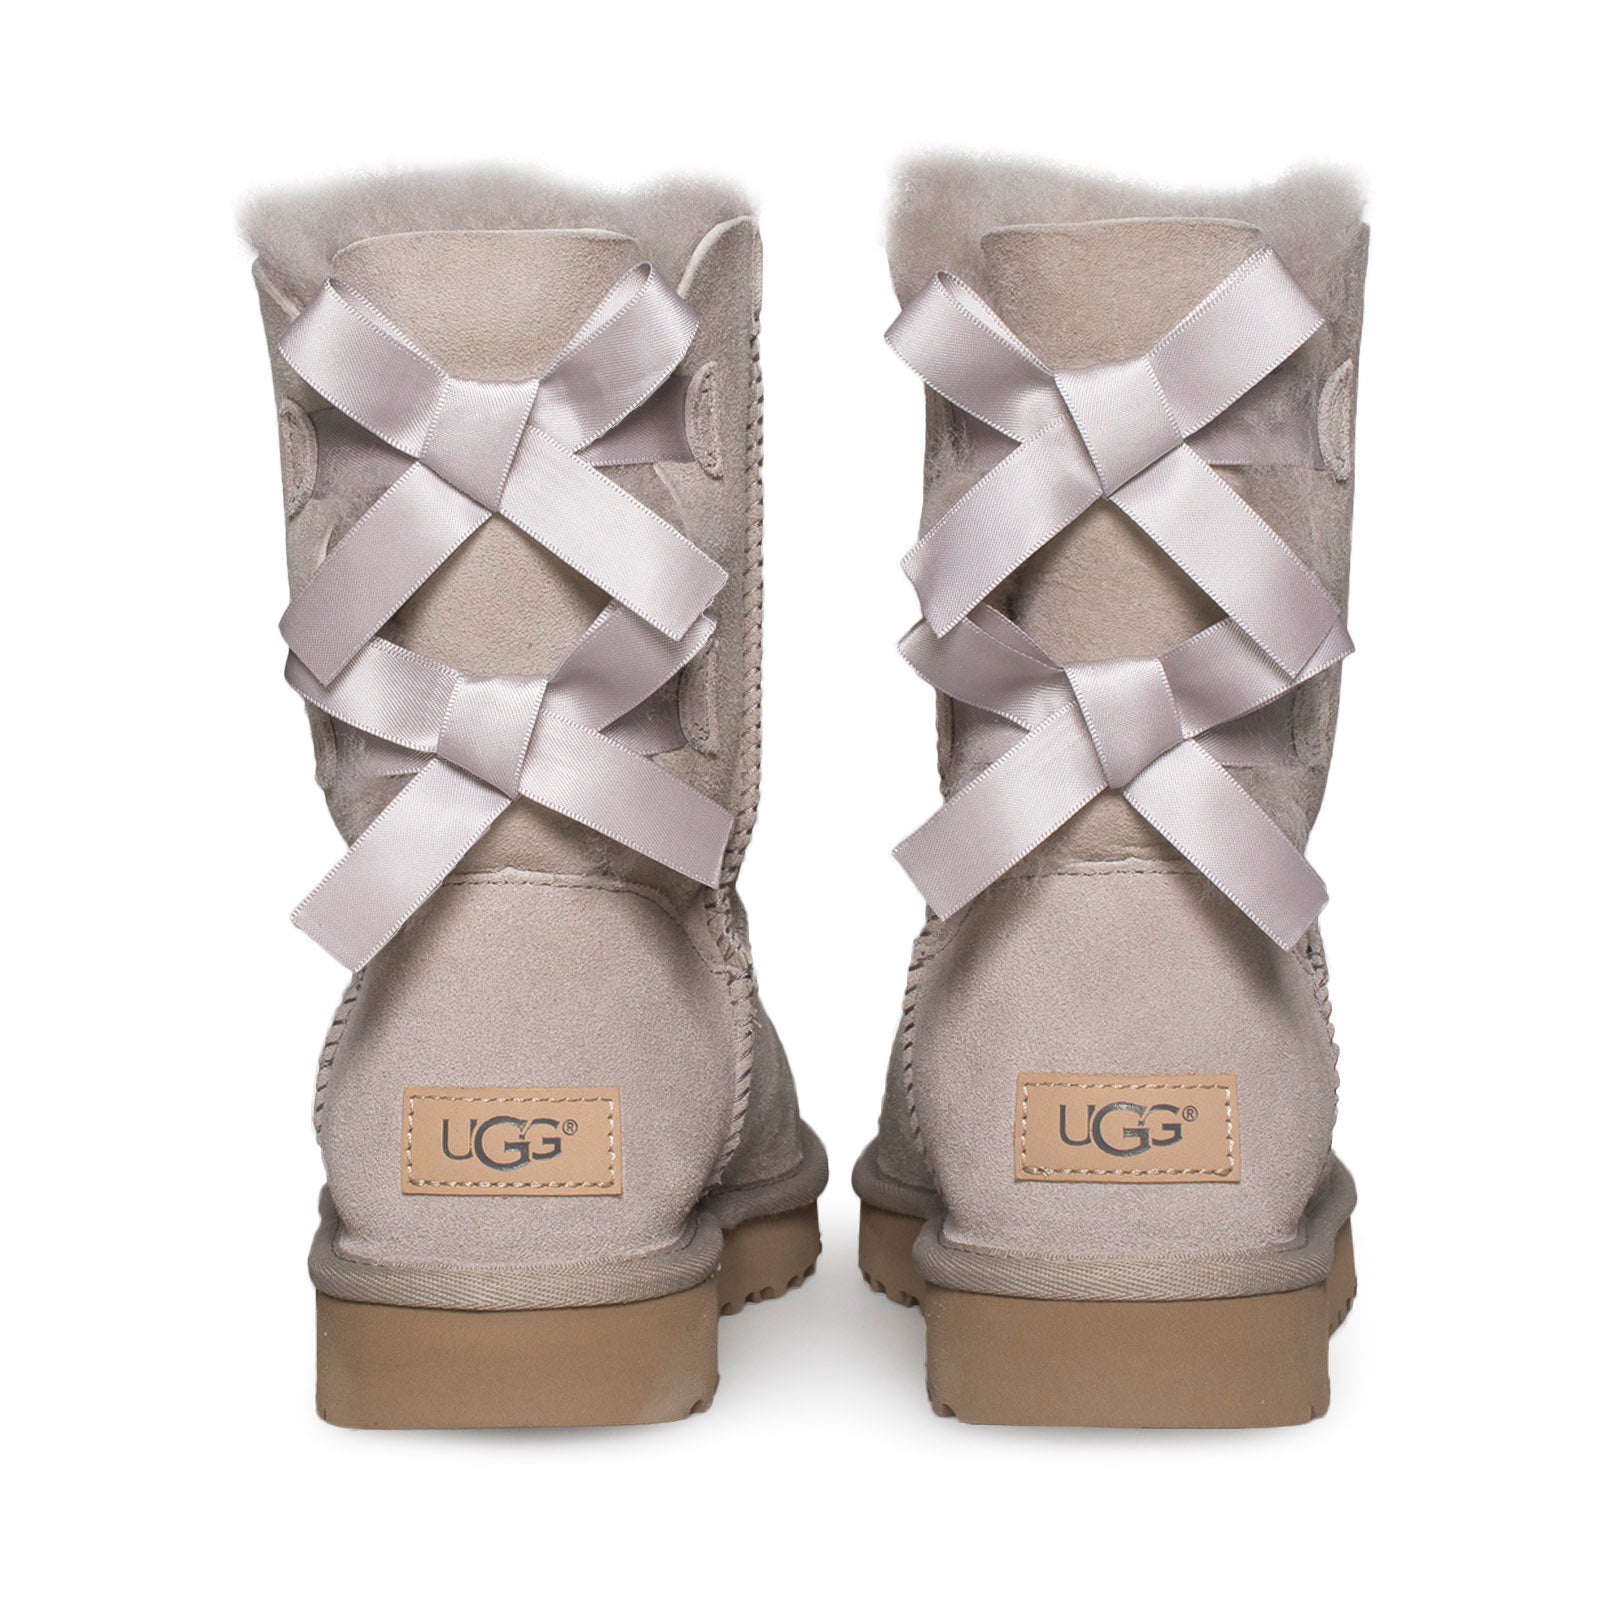 UGG Bailey Bow II Oyster Boots - Women 